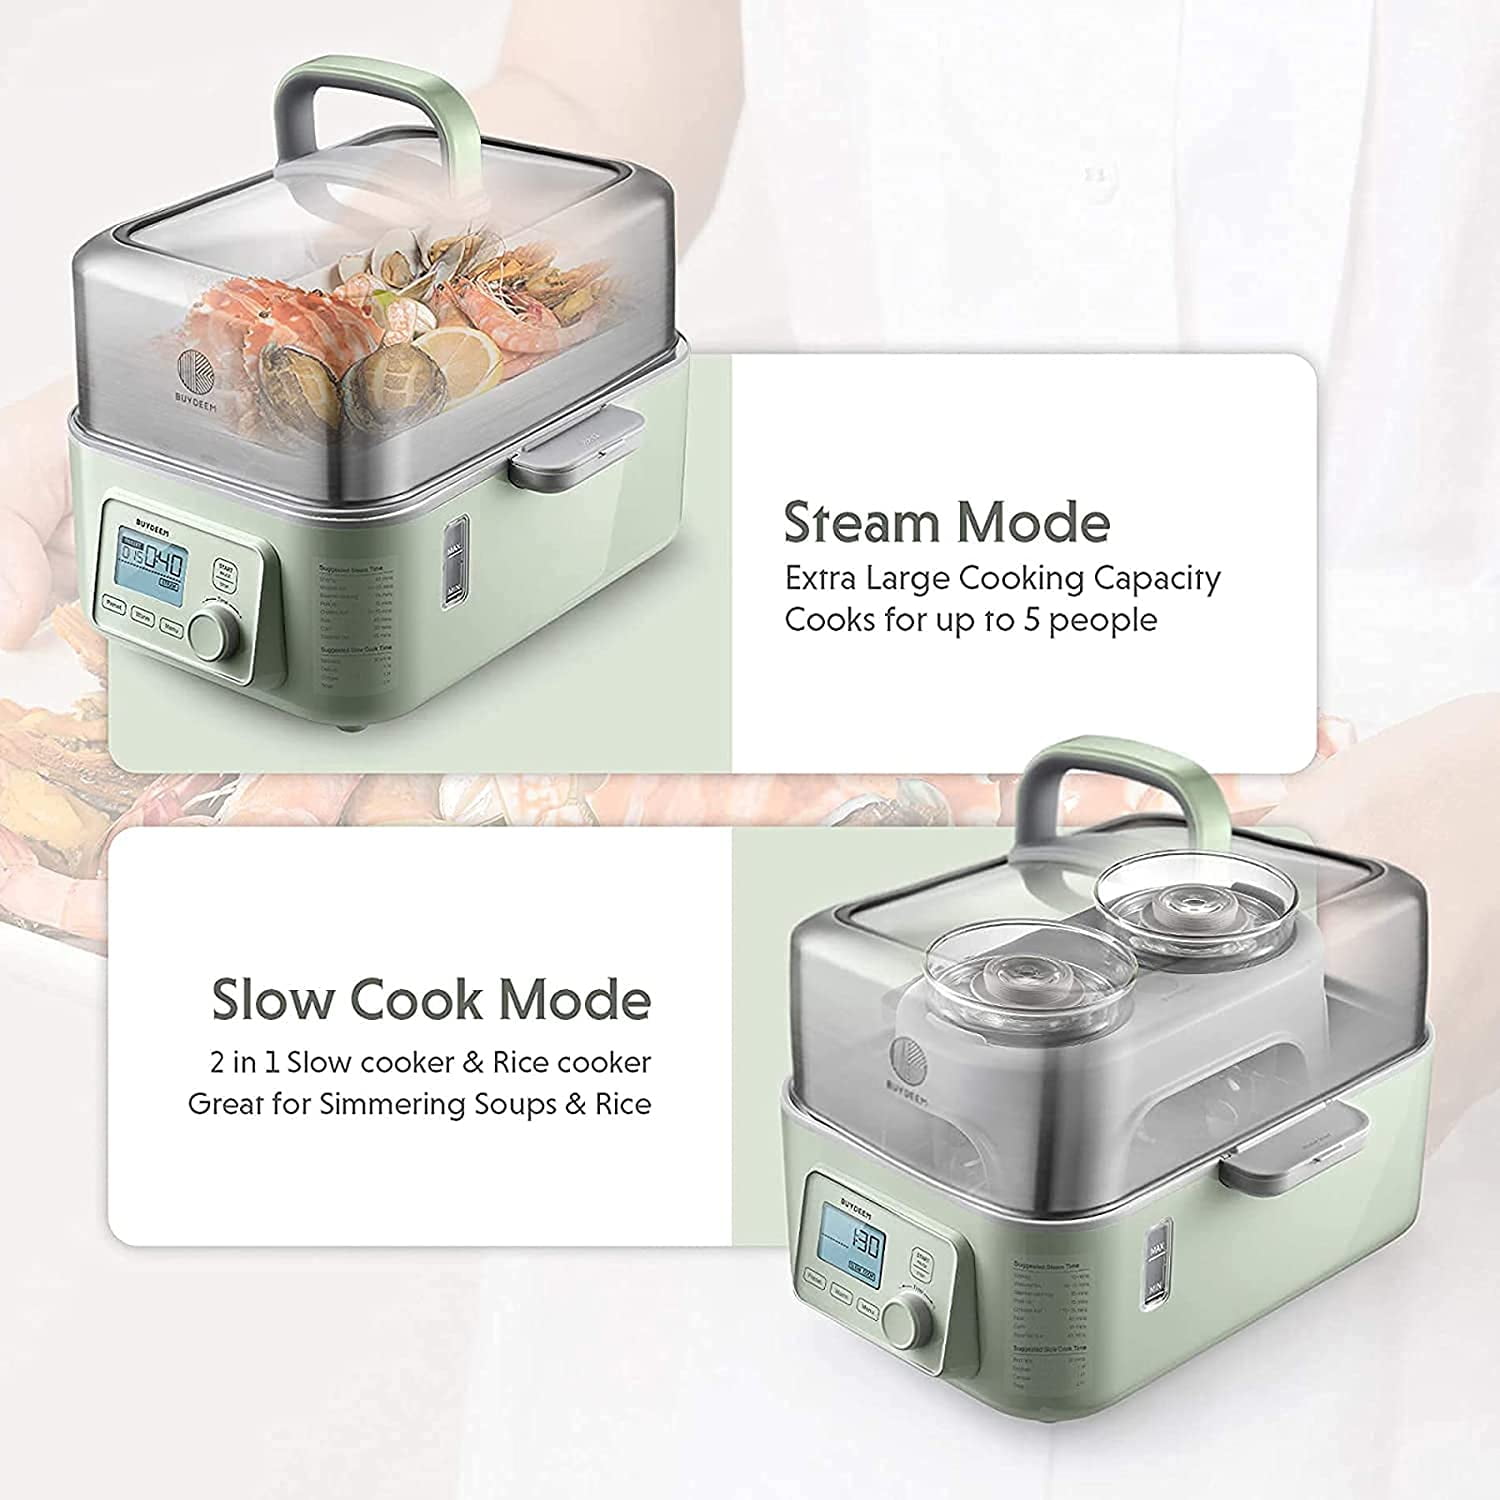 Buydeem G553 5-Quart Electric Food Steamer for Cooking, One Touch Vegetable Steamer, Digital Multifunctional Steamer, Quick Steam in 60s, Stainless